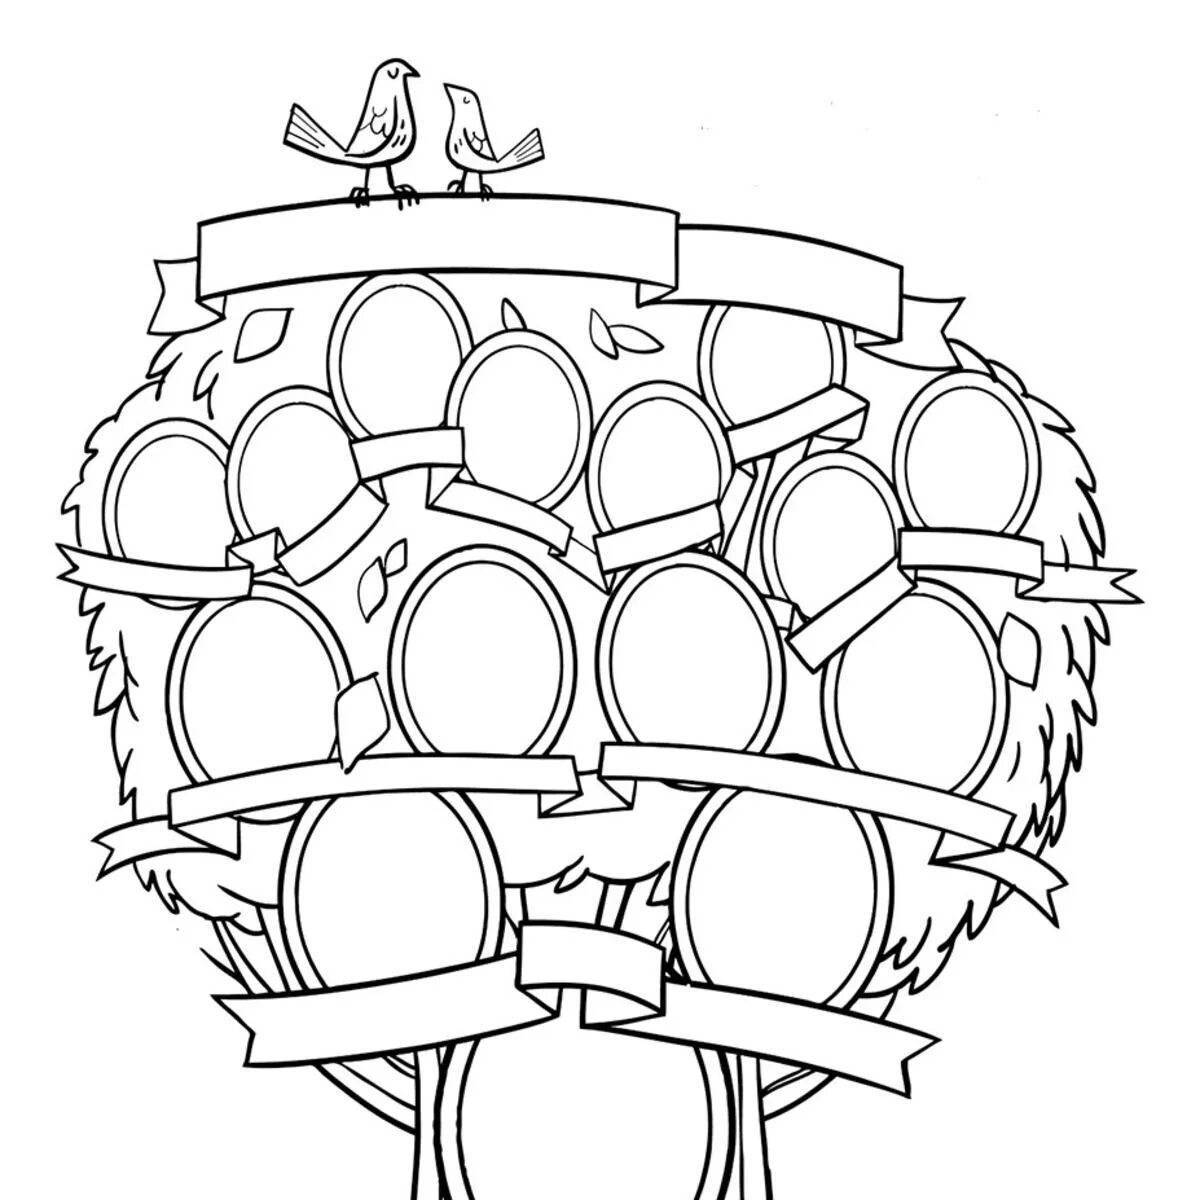 Luxurious family tree coloring page